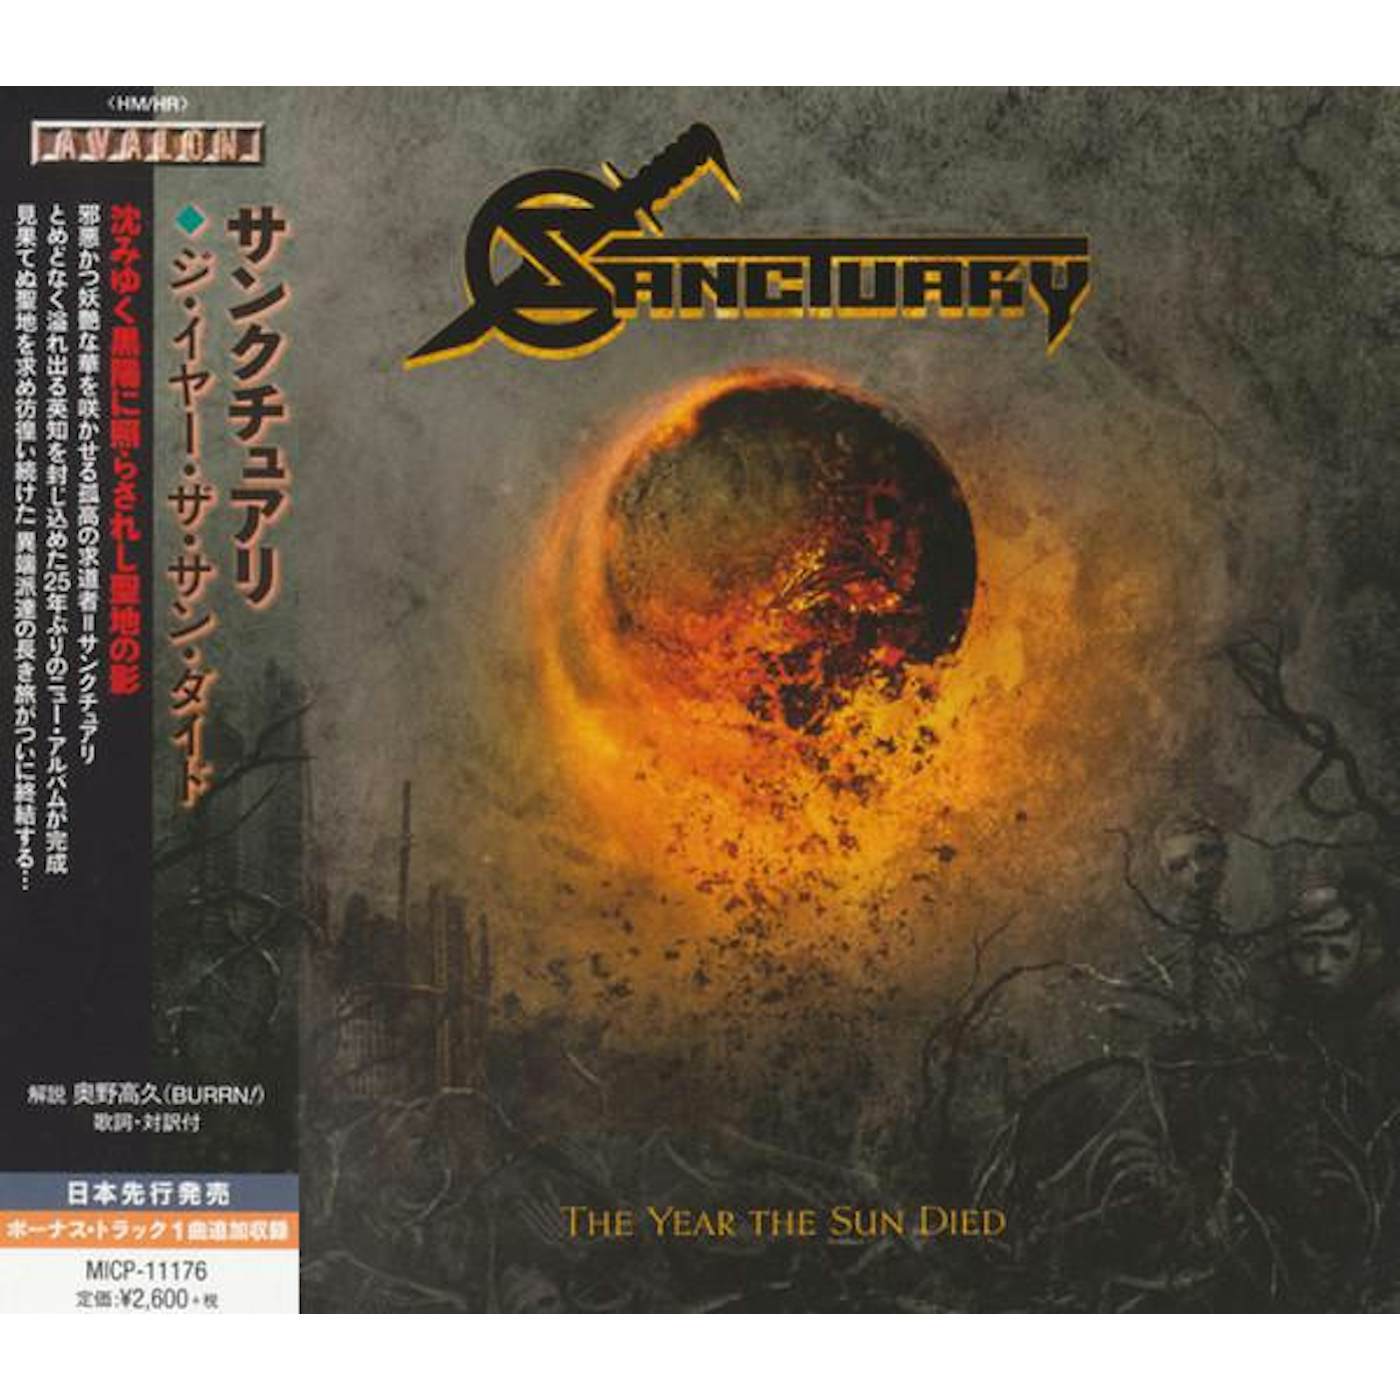 Sanctuary YEAR THE SUN DIED CD